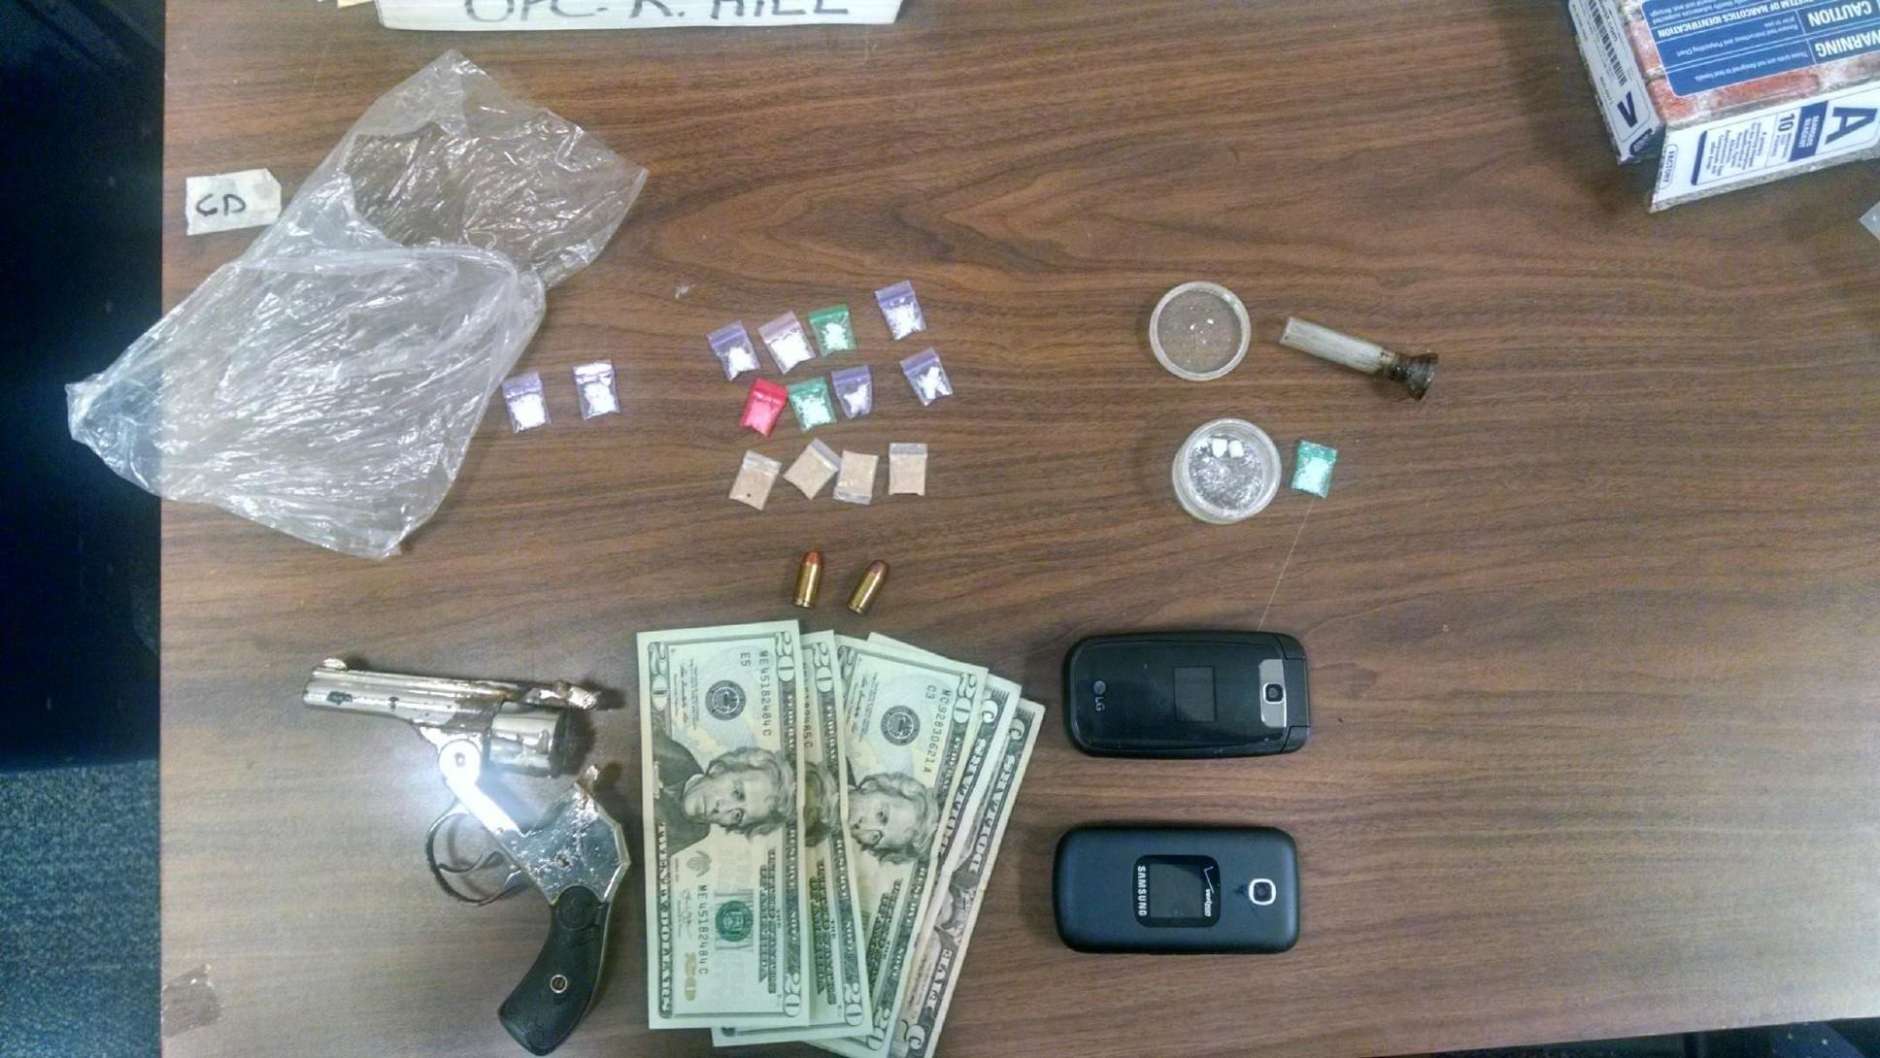 More than 3 grams of crack cocaine, nearly 1 gram of heroin, and a loaded revolver handgun was seized during a February 2015 traffic stop in Glen Burnie. Anne Arundel County Police arrested the two suspects. (Photo courtesy Anne Arundel County police)